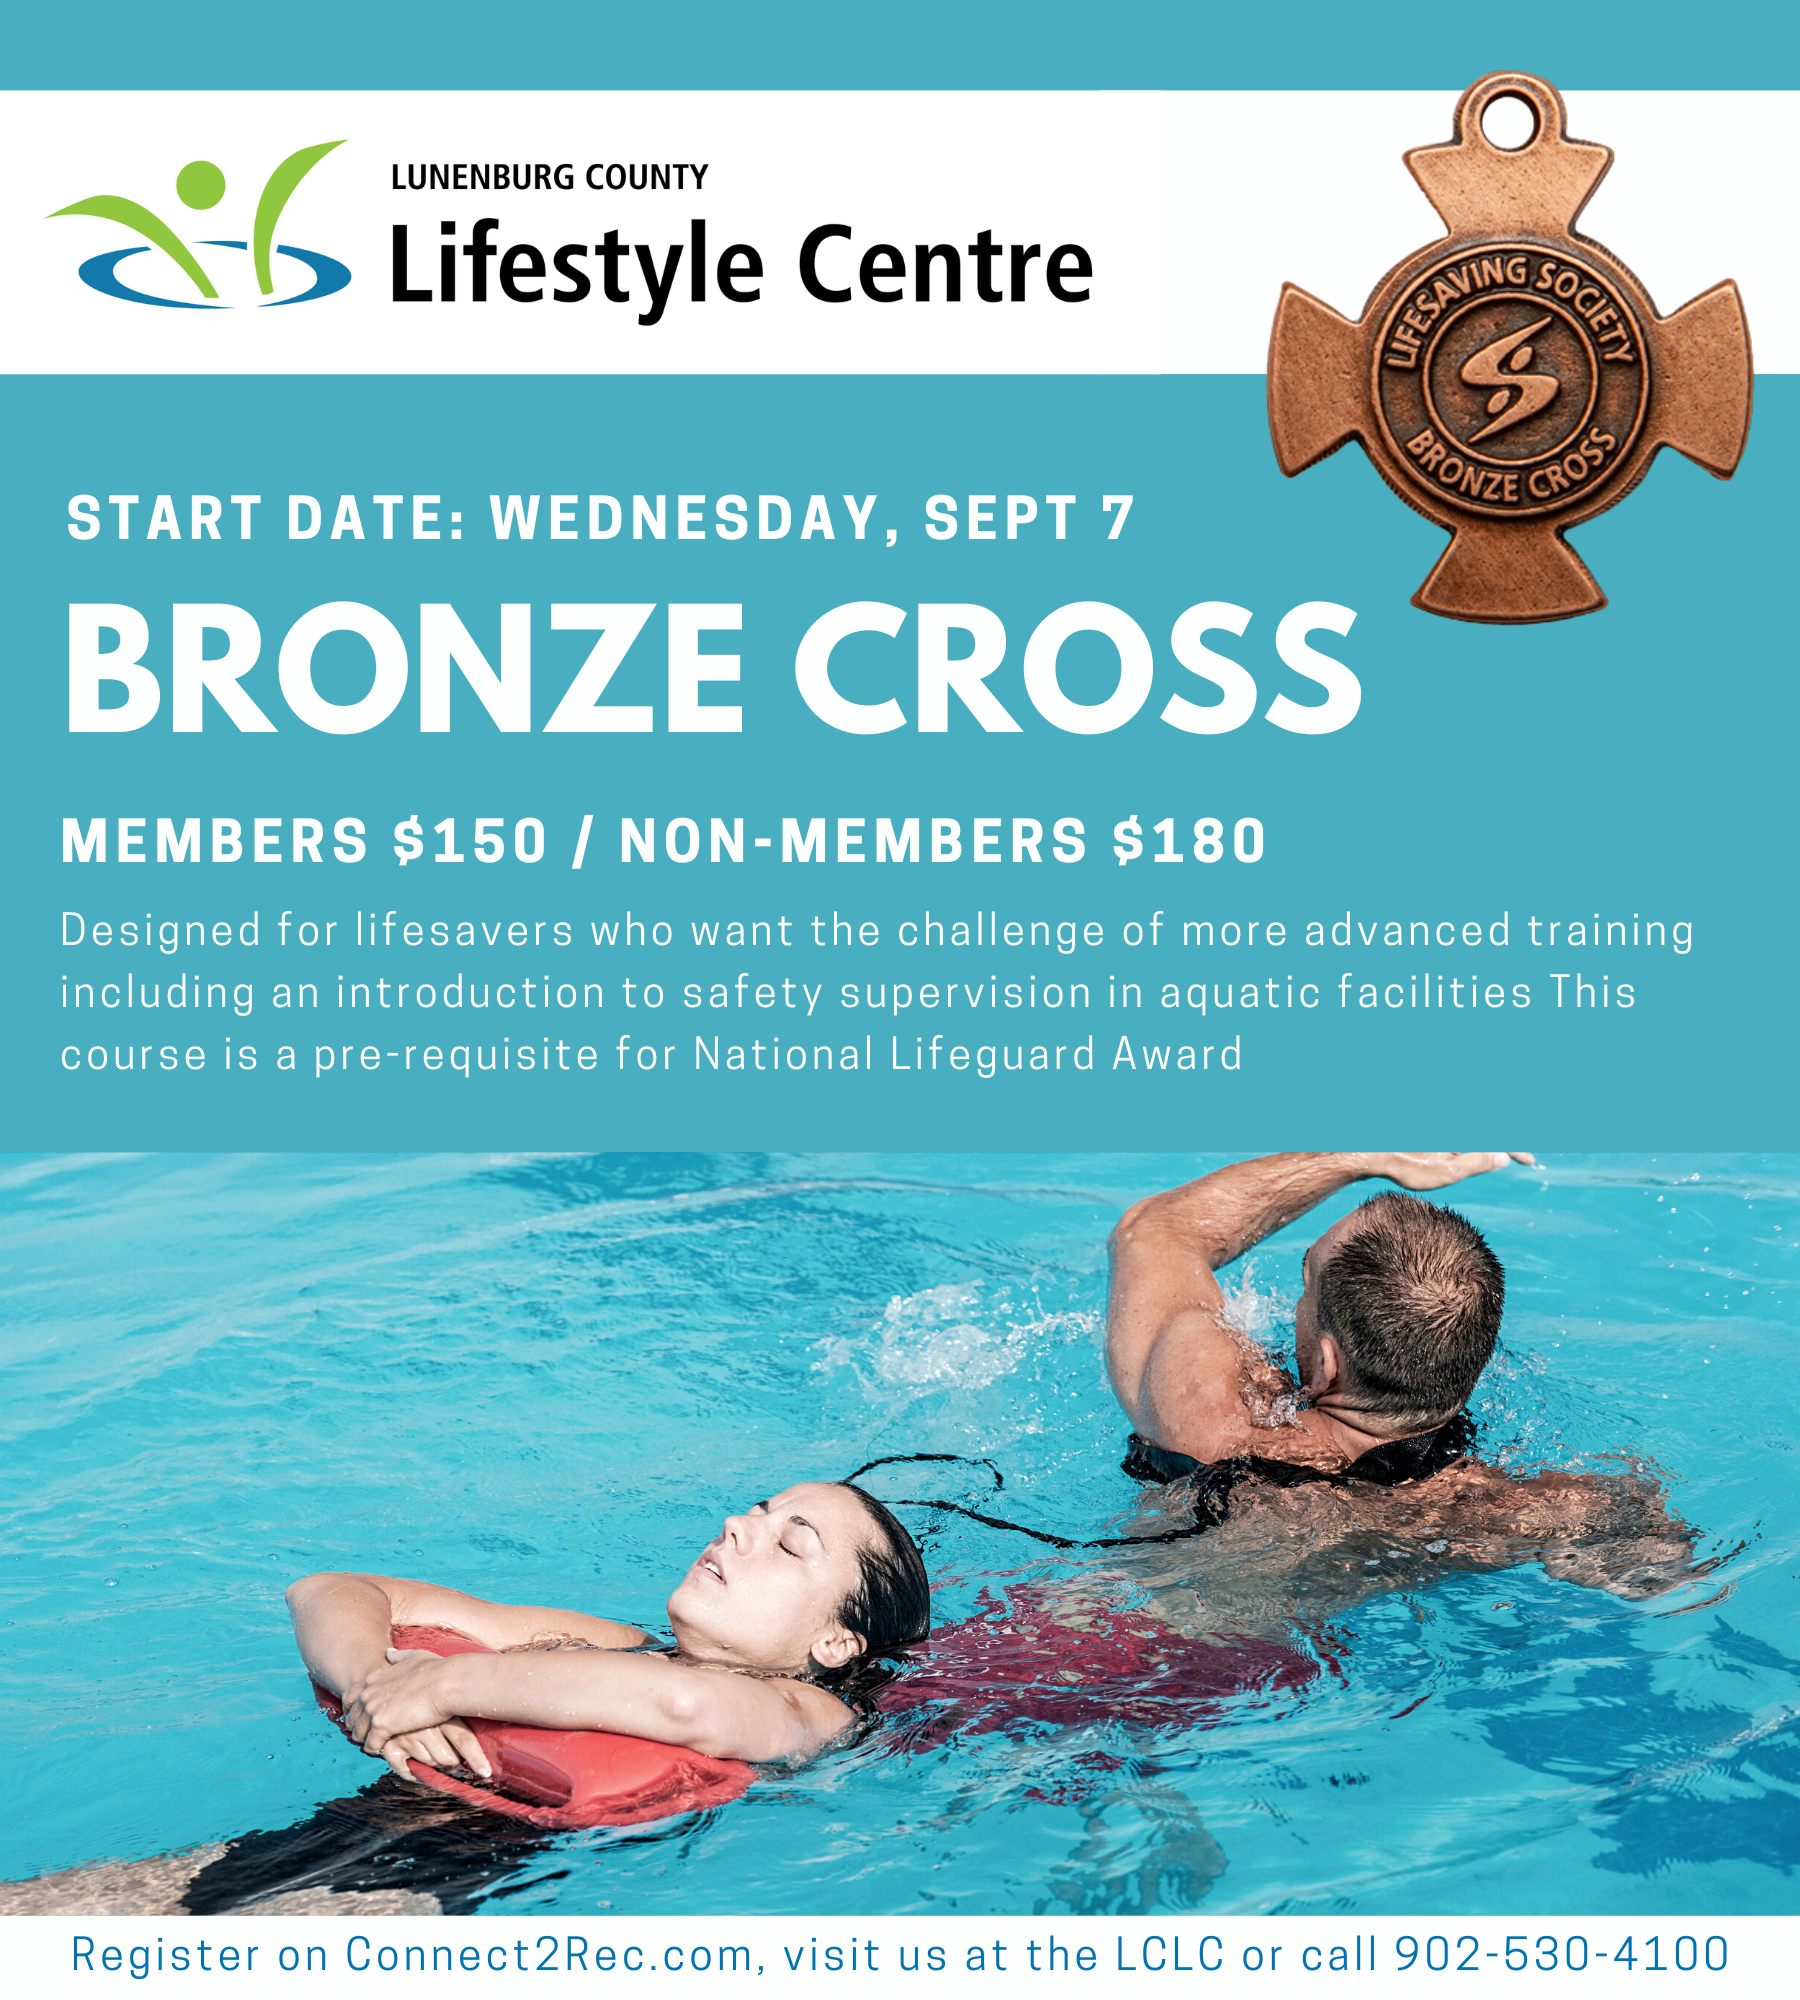 Designed for lifesavers who want the challenge of more advanced training including an introduction to safety supervision in aquatic facilities This course is a pre requisite for National Lifeguard Award 1